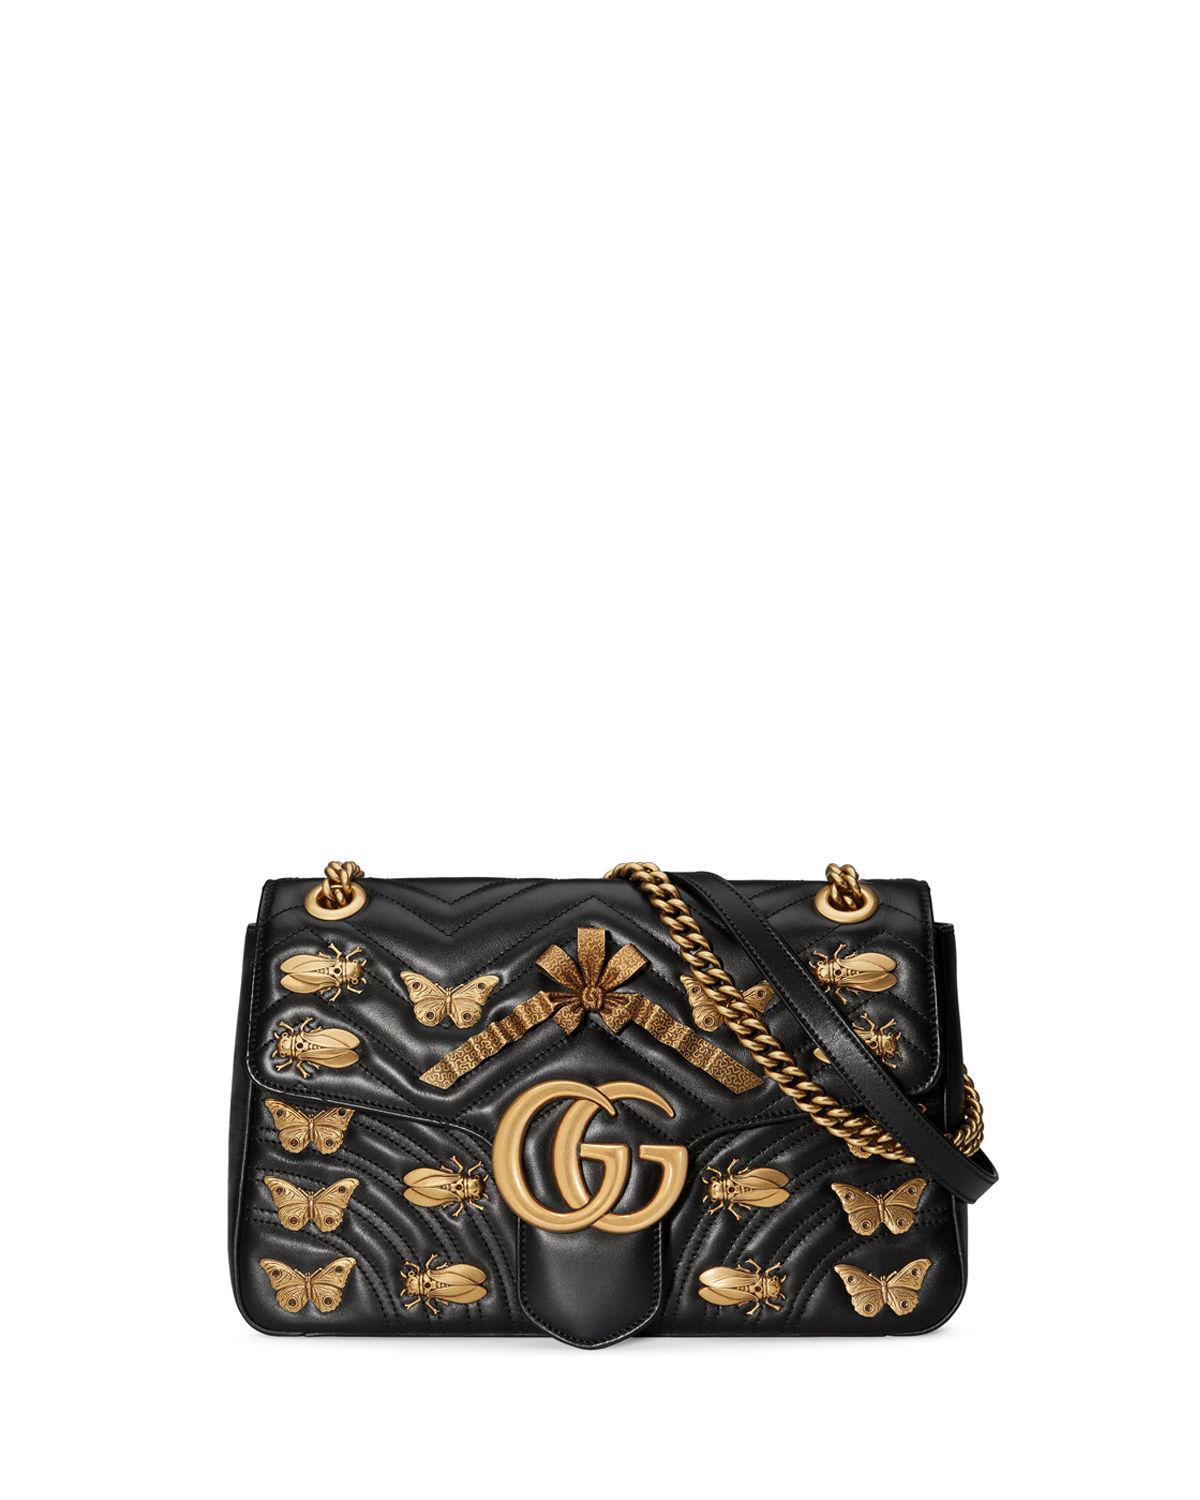 Gucci Leather Gg Marmont 2.0 Medium Insect Shoulder Bag in Black - Lyst